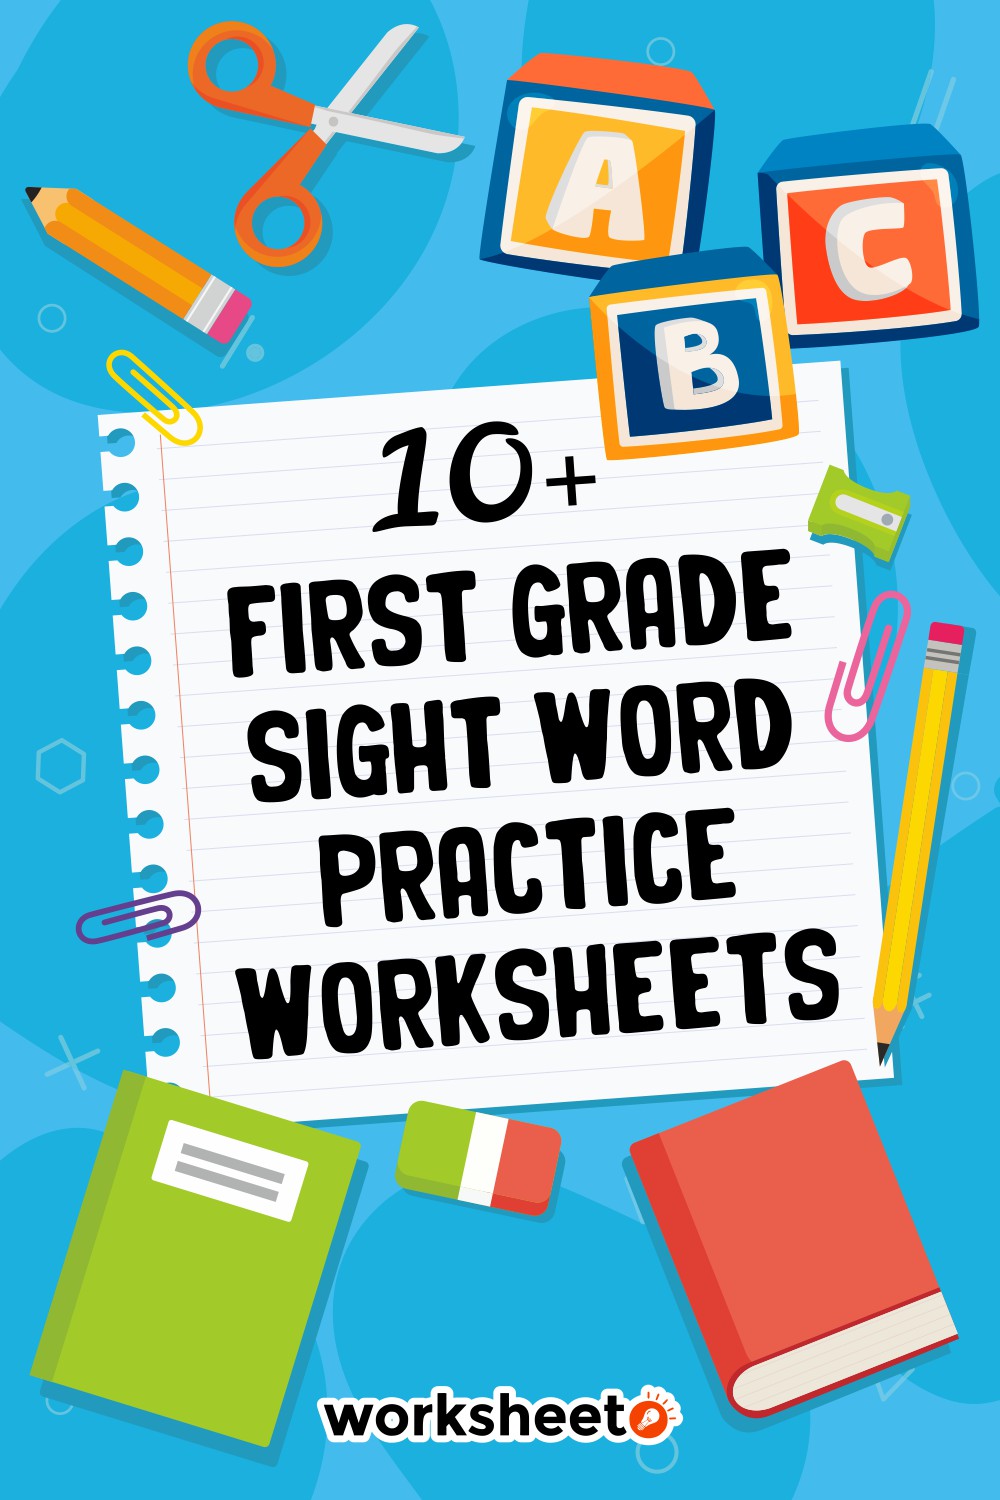 First Grade Sight Word Practice Worksheets